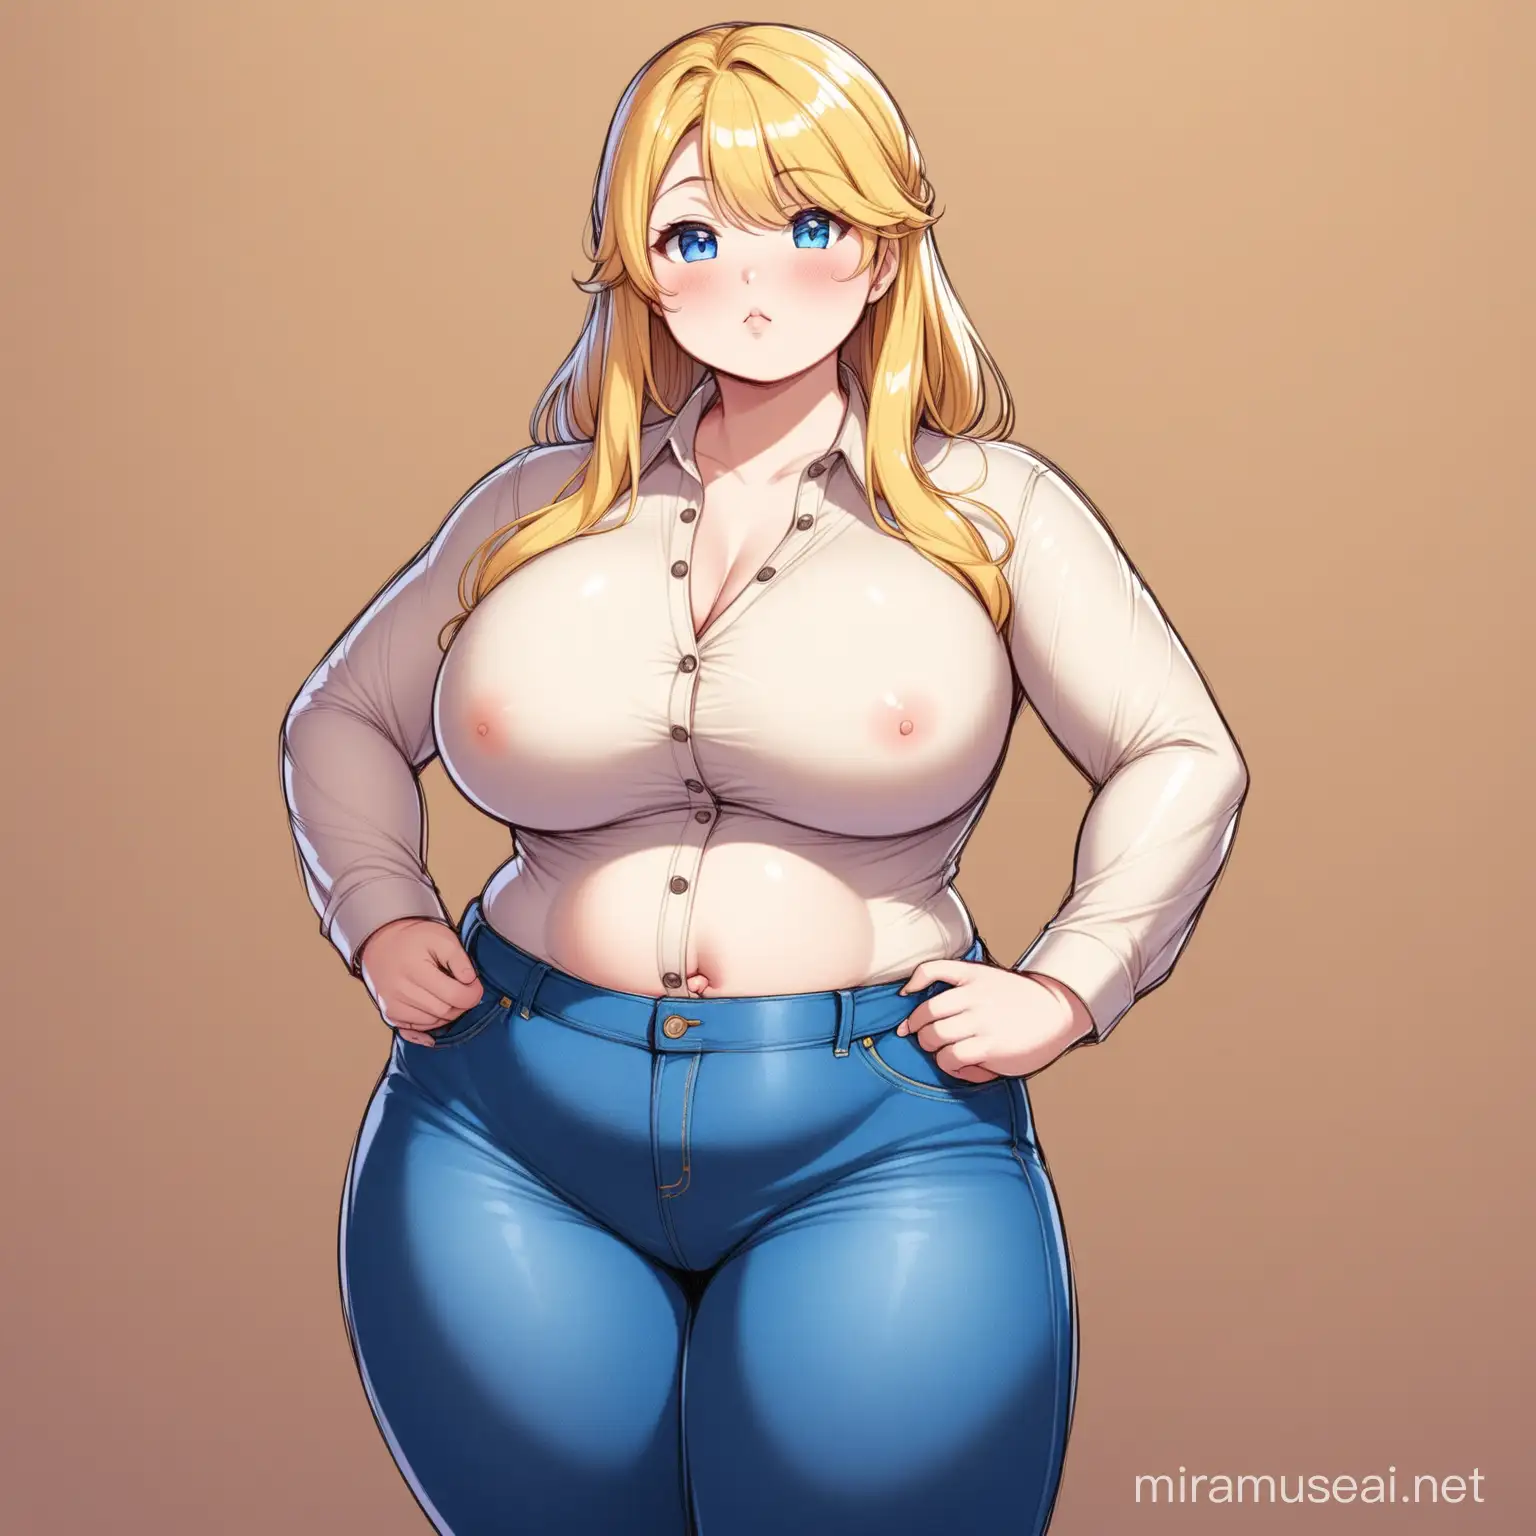 pudgy, blonde, tight clothes, jeans, blue eyes, button up, belly out